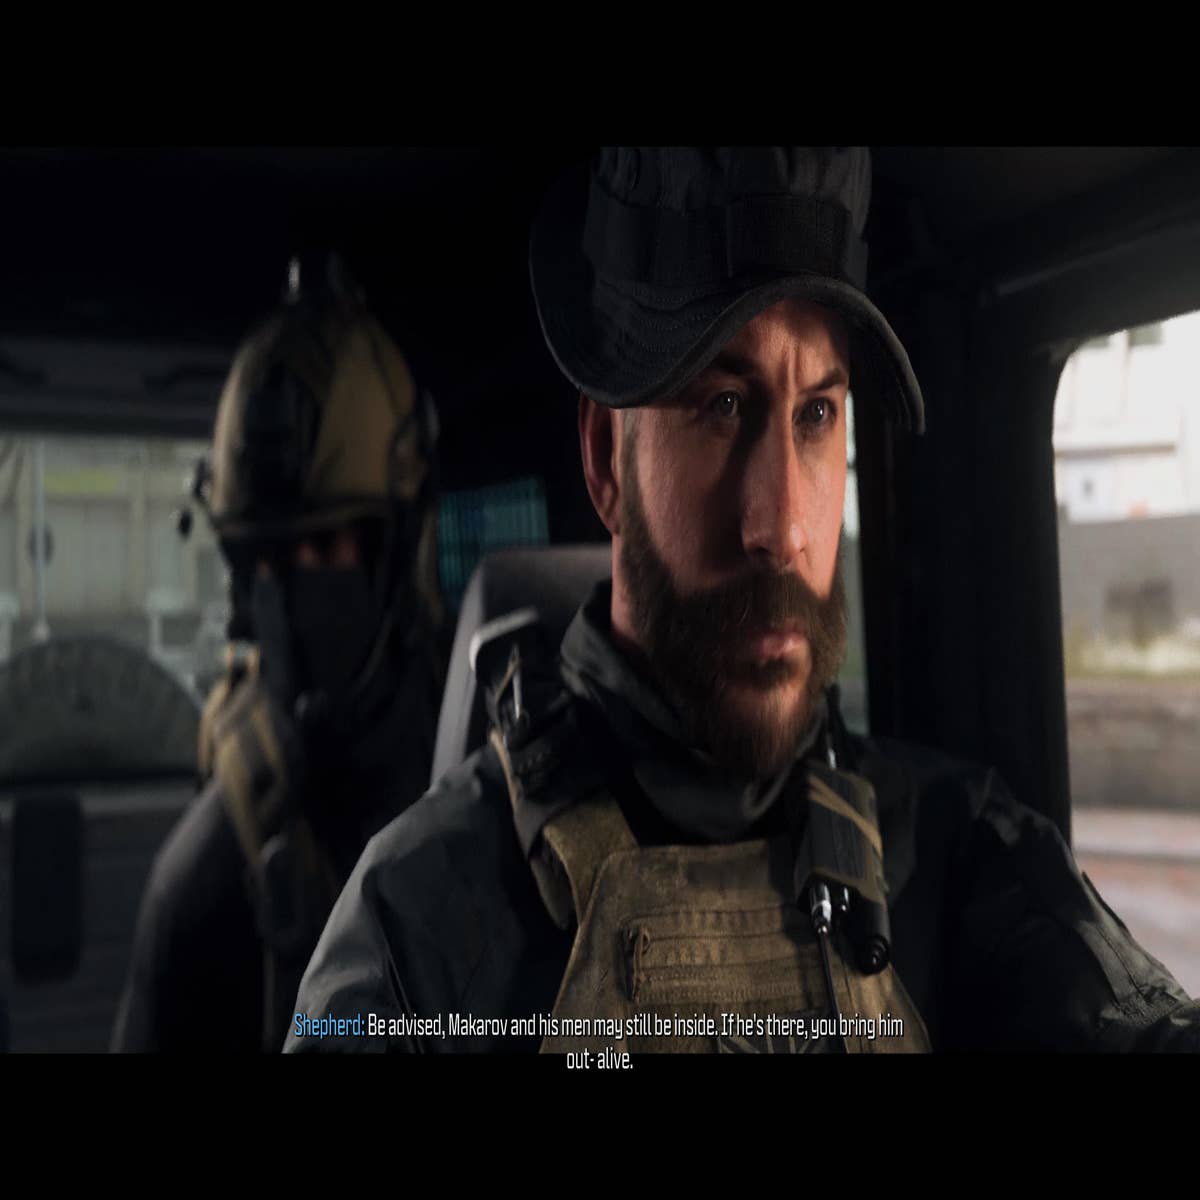 Call of Duty: Modern Warfare 3 (2023) review - video games can do